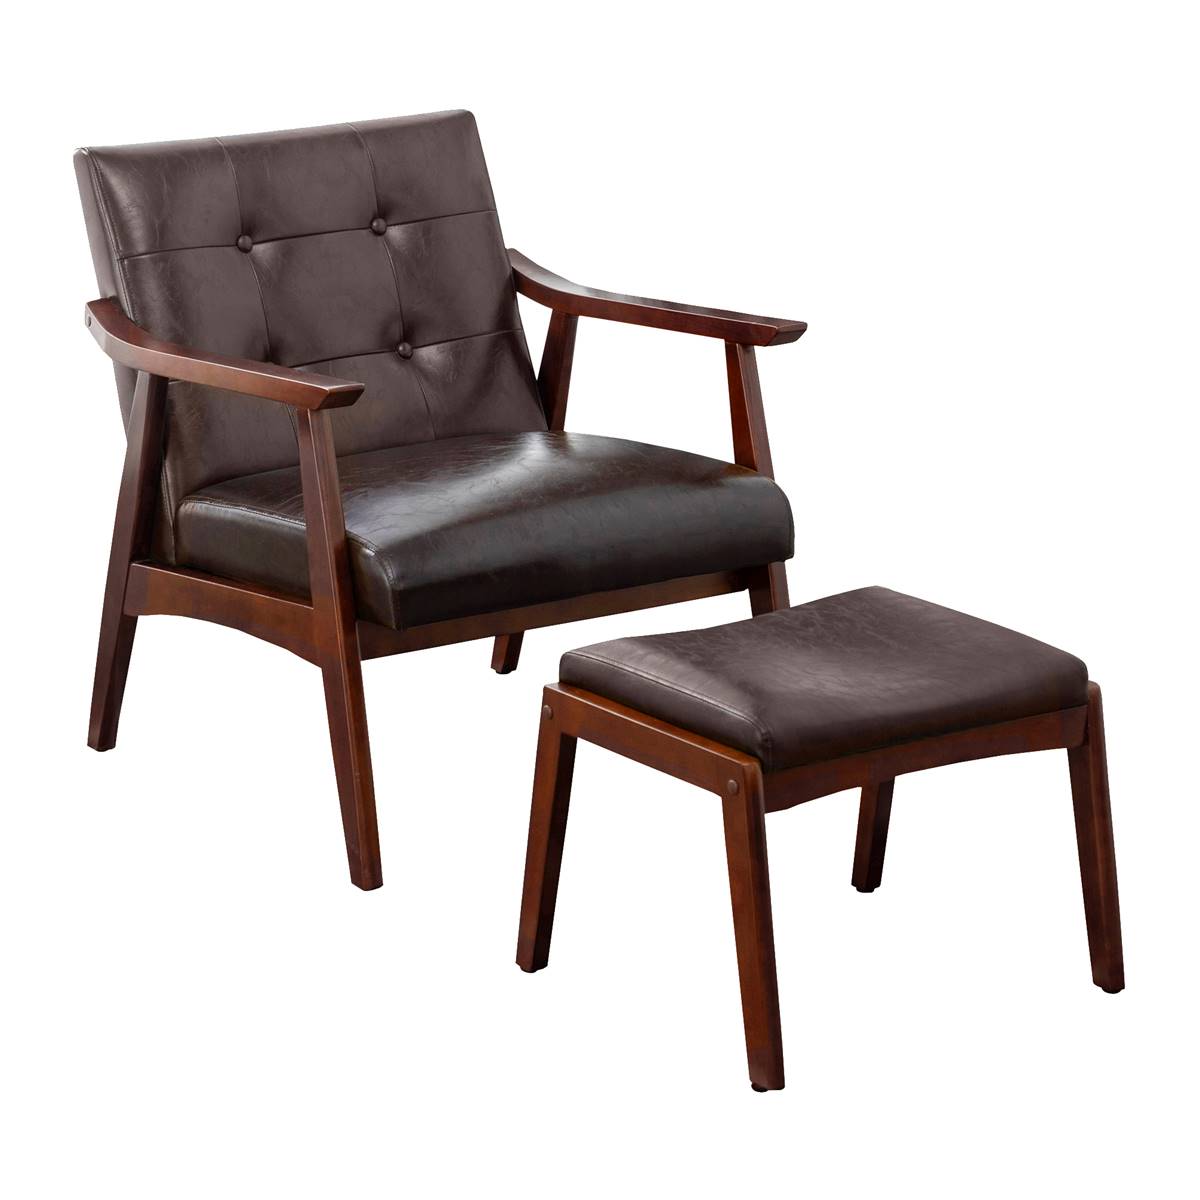 Convenience Concepts Take A Seat Natalie Accent Chair & Ottoman